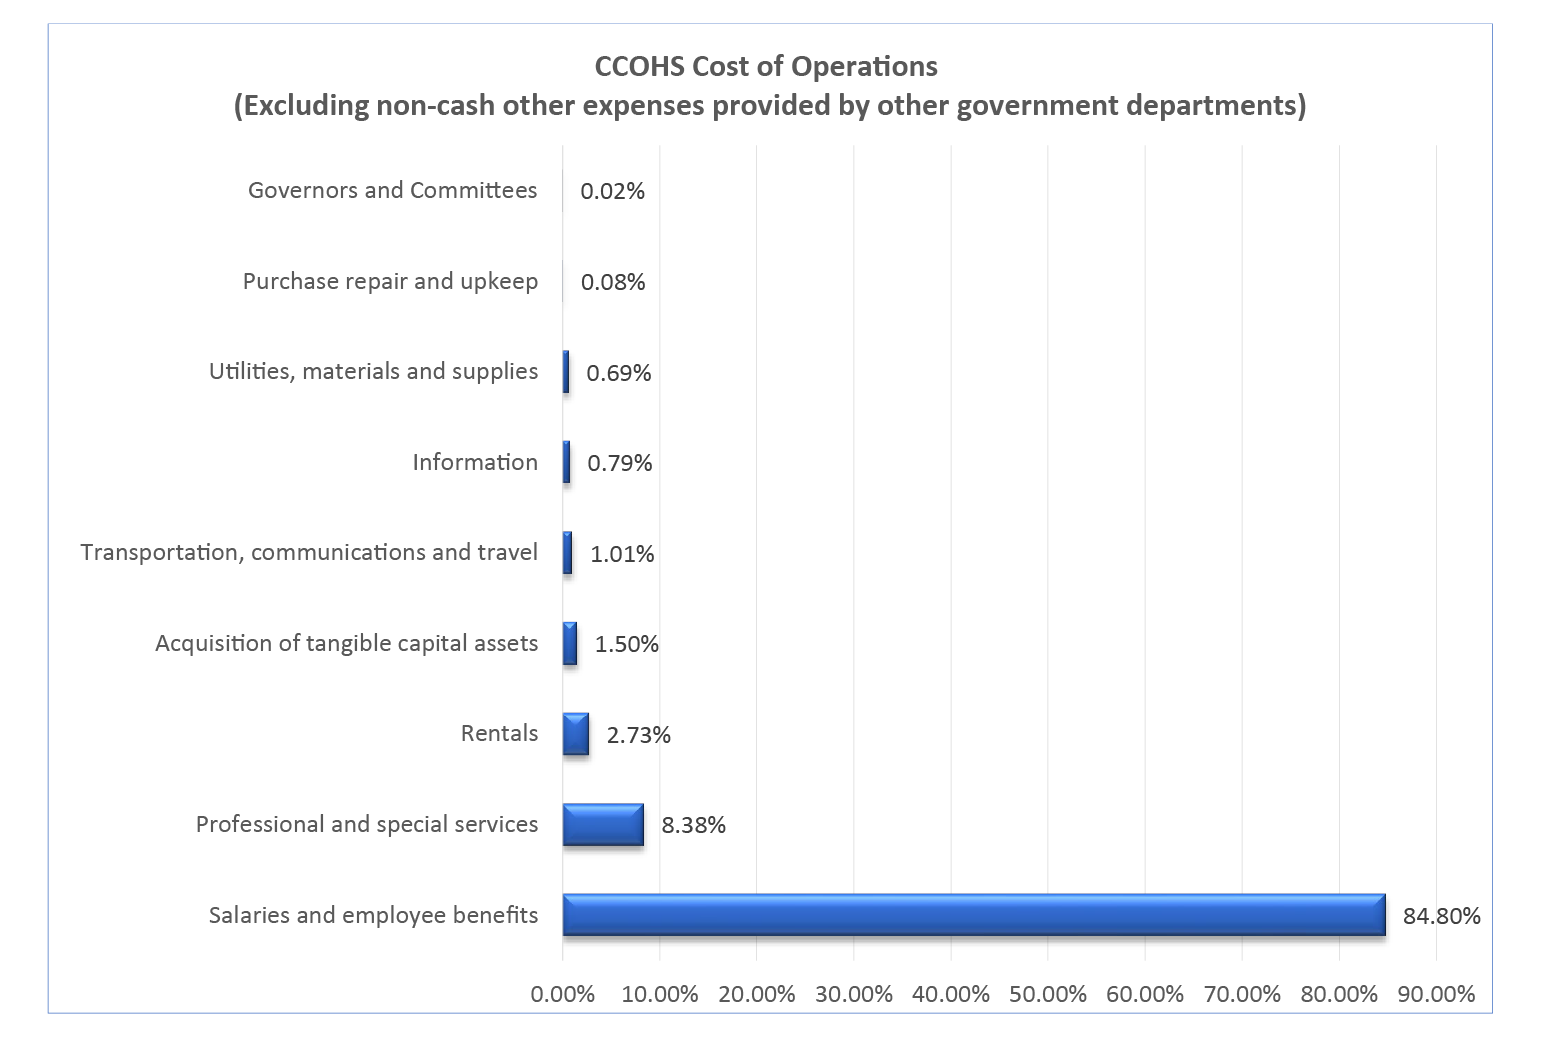 Graph for CCOHS Cost of Operations
				  (Excluding non-cash other expenses provided by other government departments)